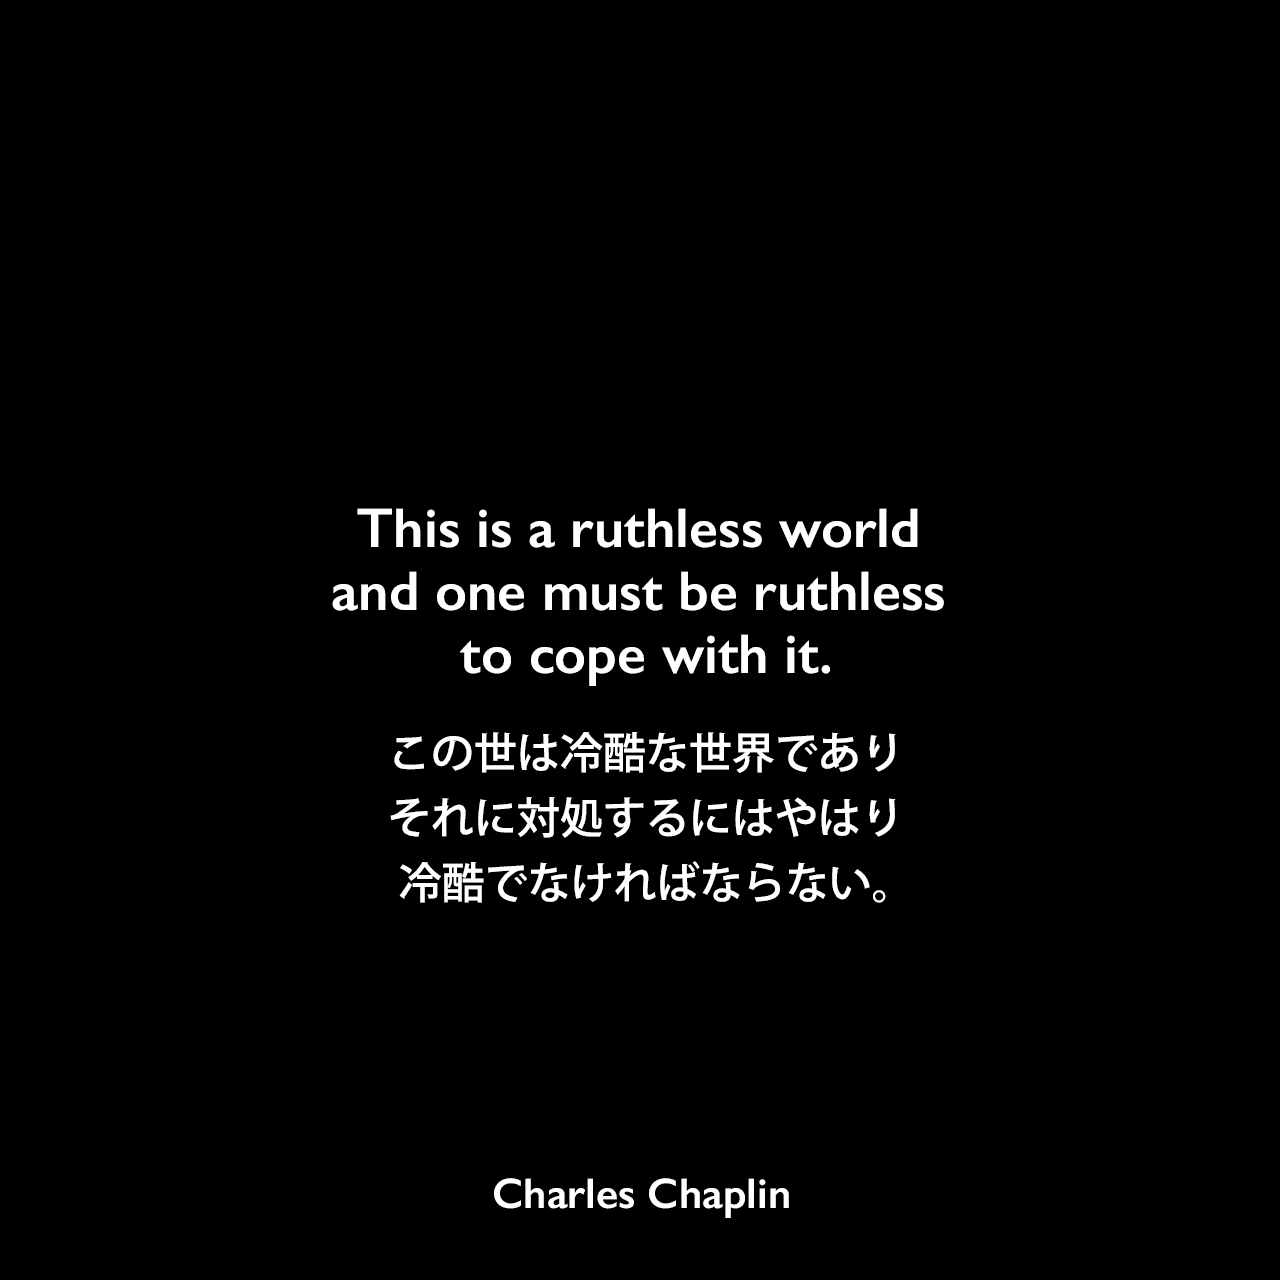 This is a ruthless world and one must be ruthless to cope with it.この世は冷酷な世界であり、それに対処するにはやはり冷酷でなければならない。Charles Chaplin